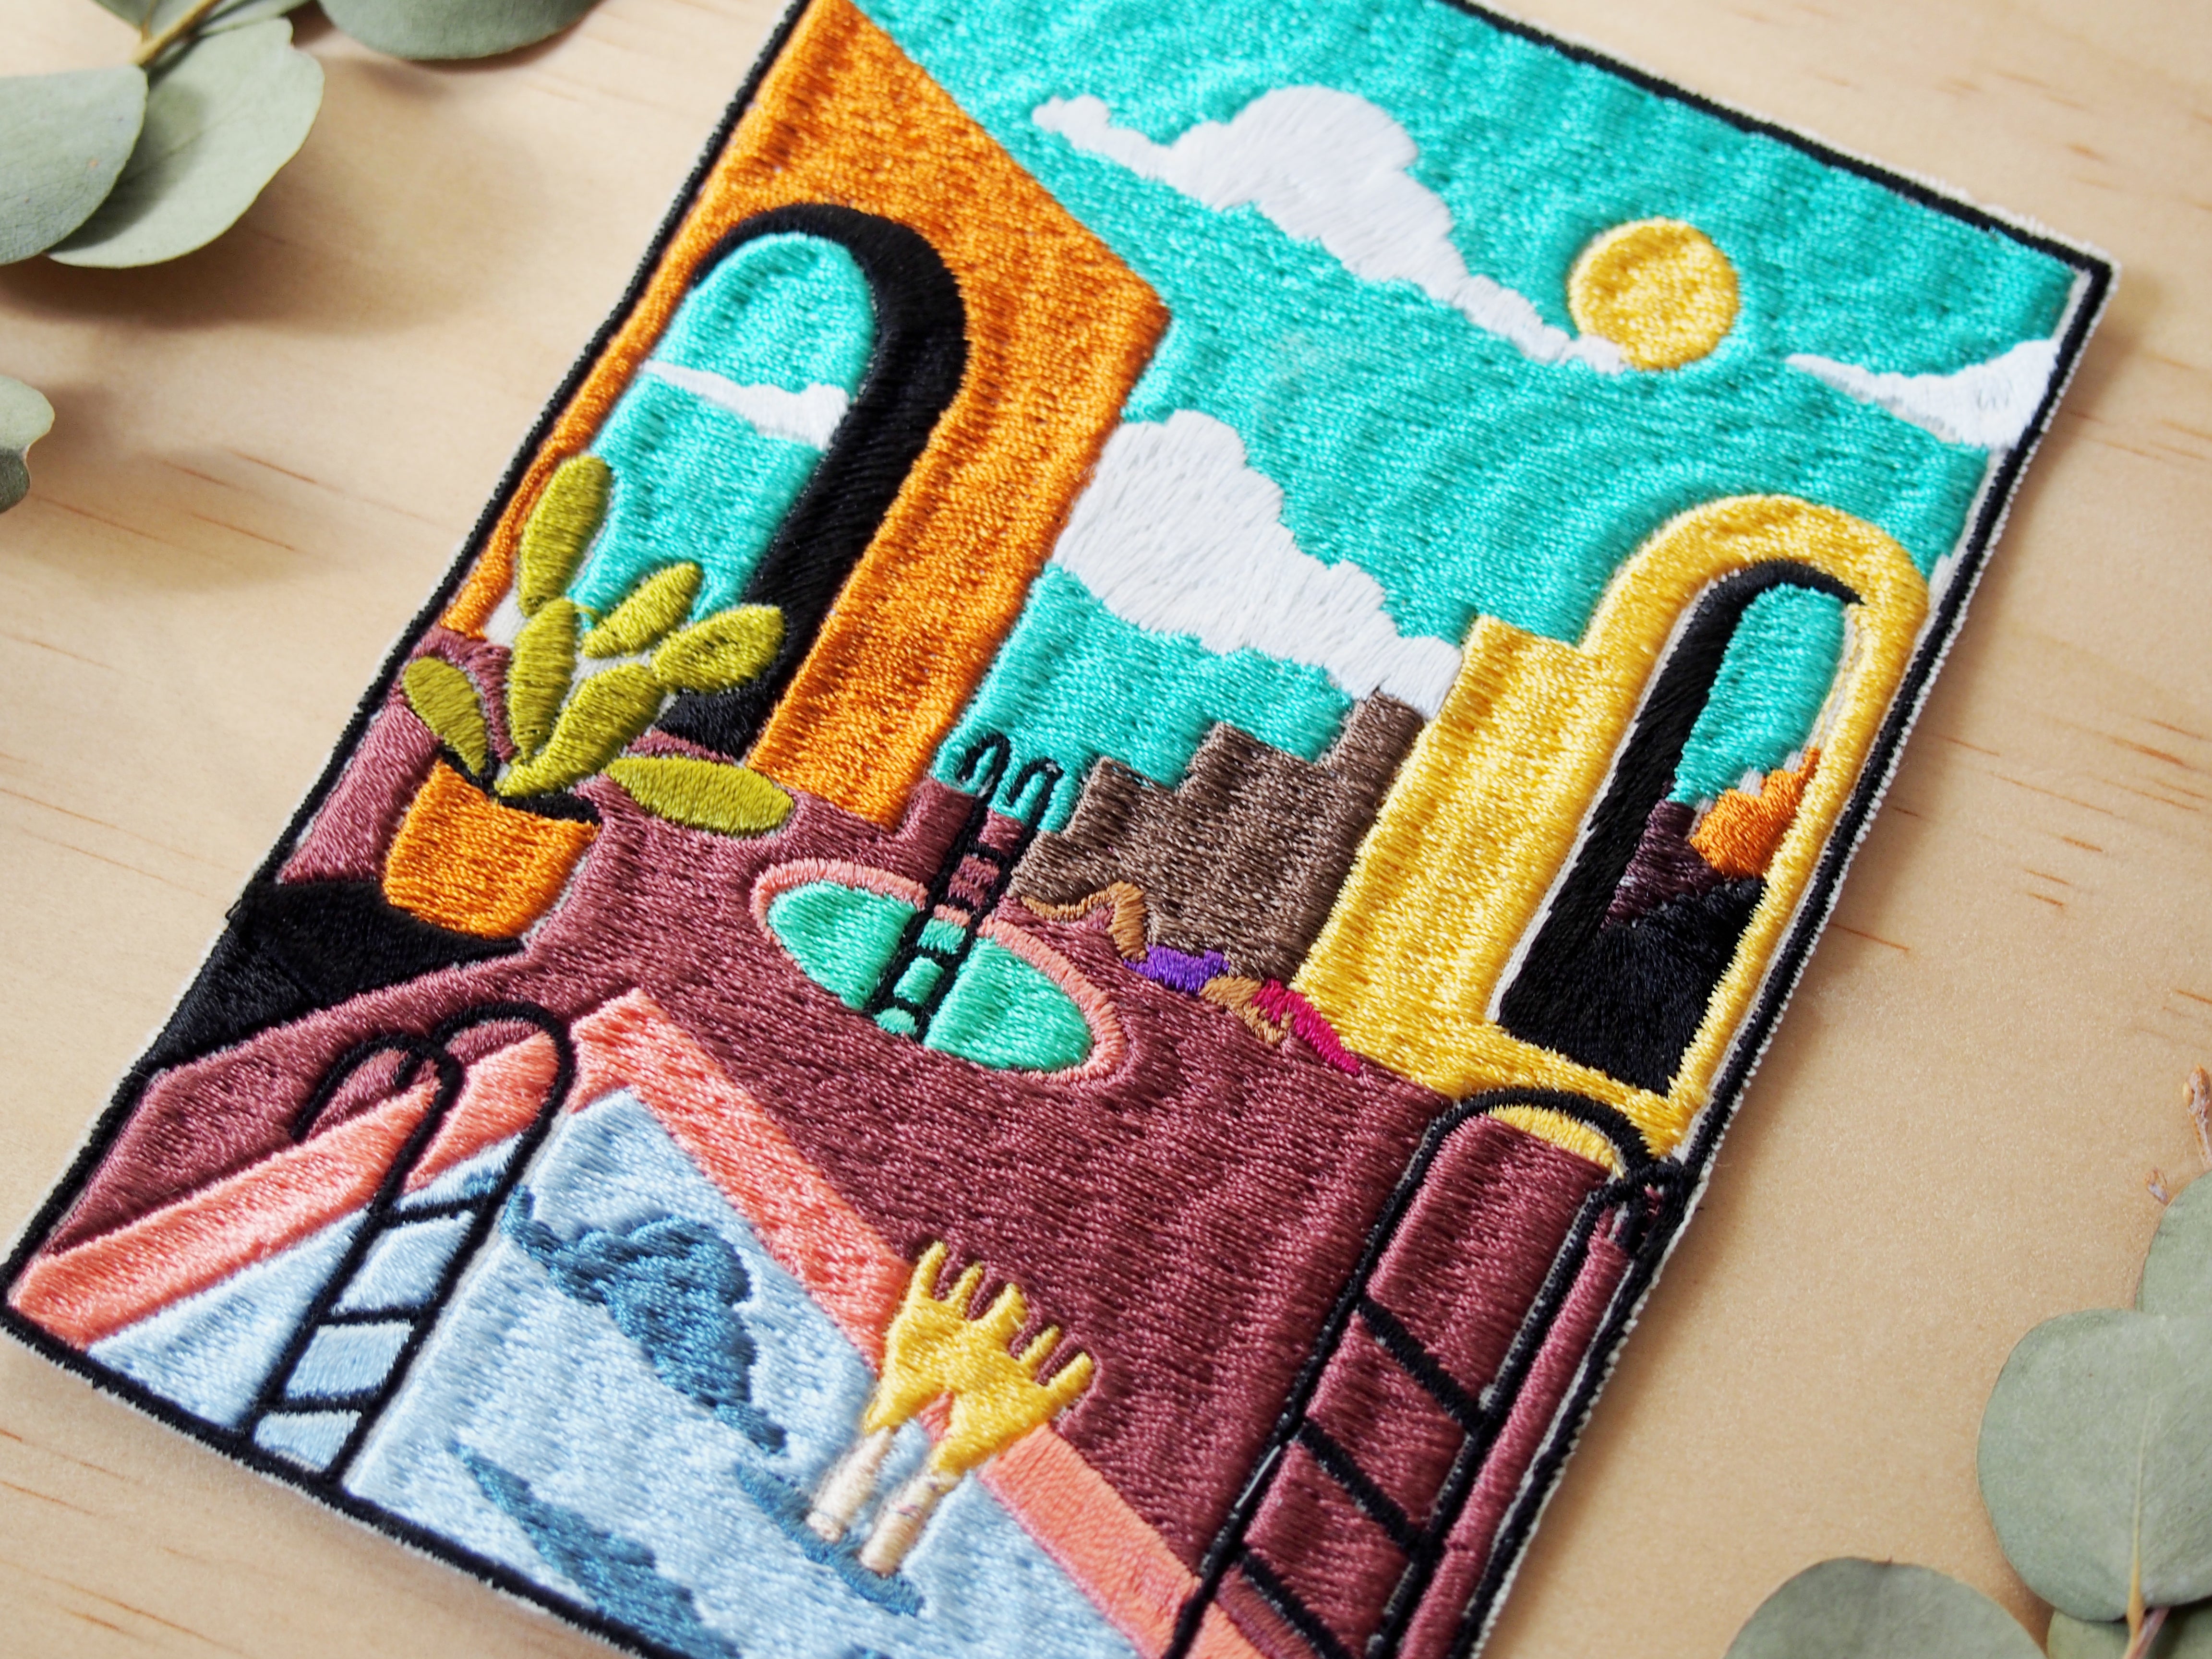 Day Dream embroidery